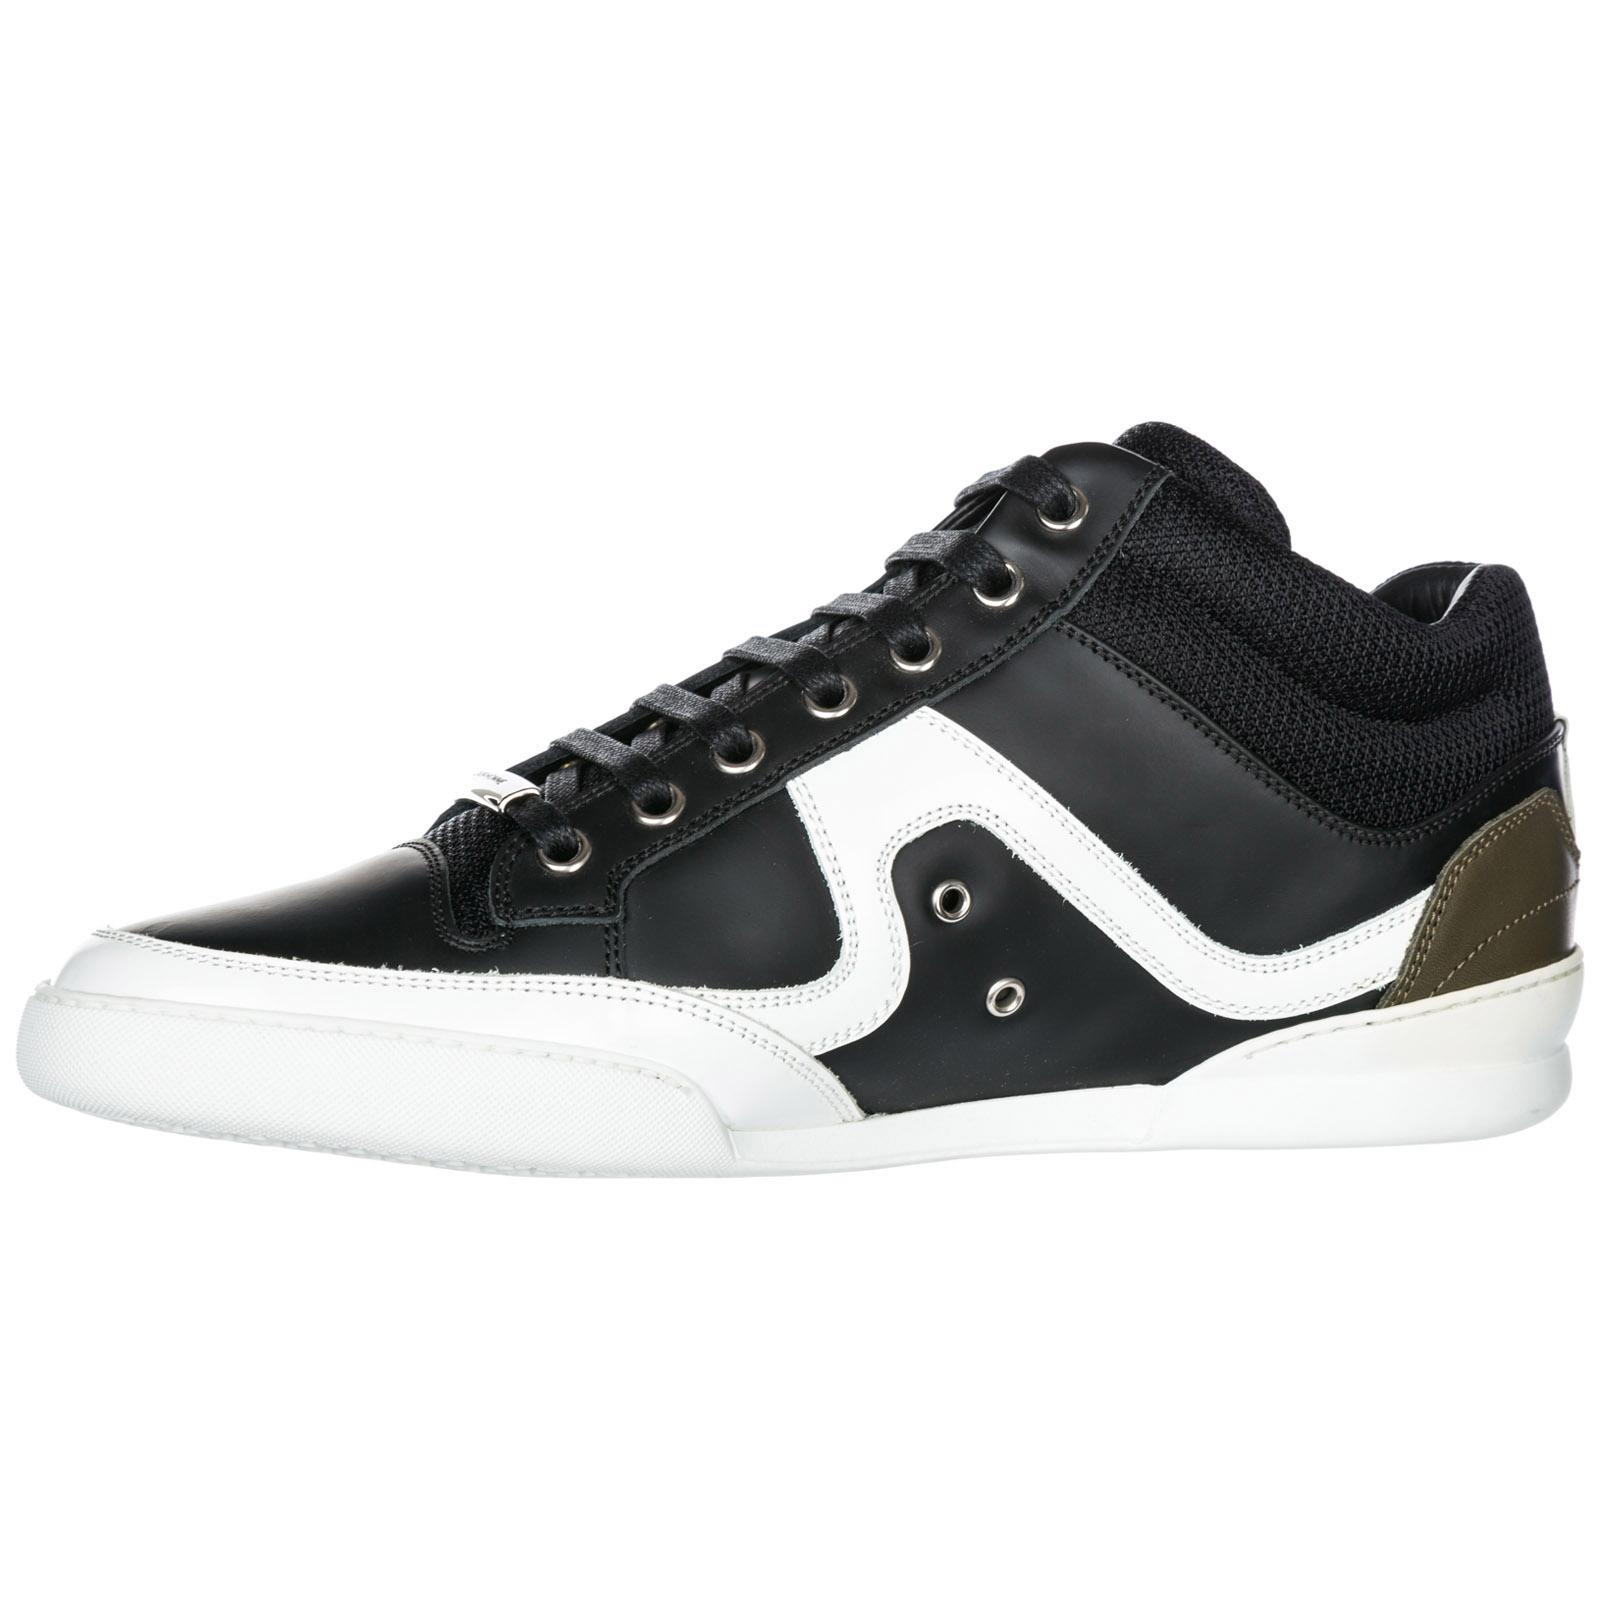 Dior Men's Shoes Leather Trainers Sneakers in Black / White (Black) for ...